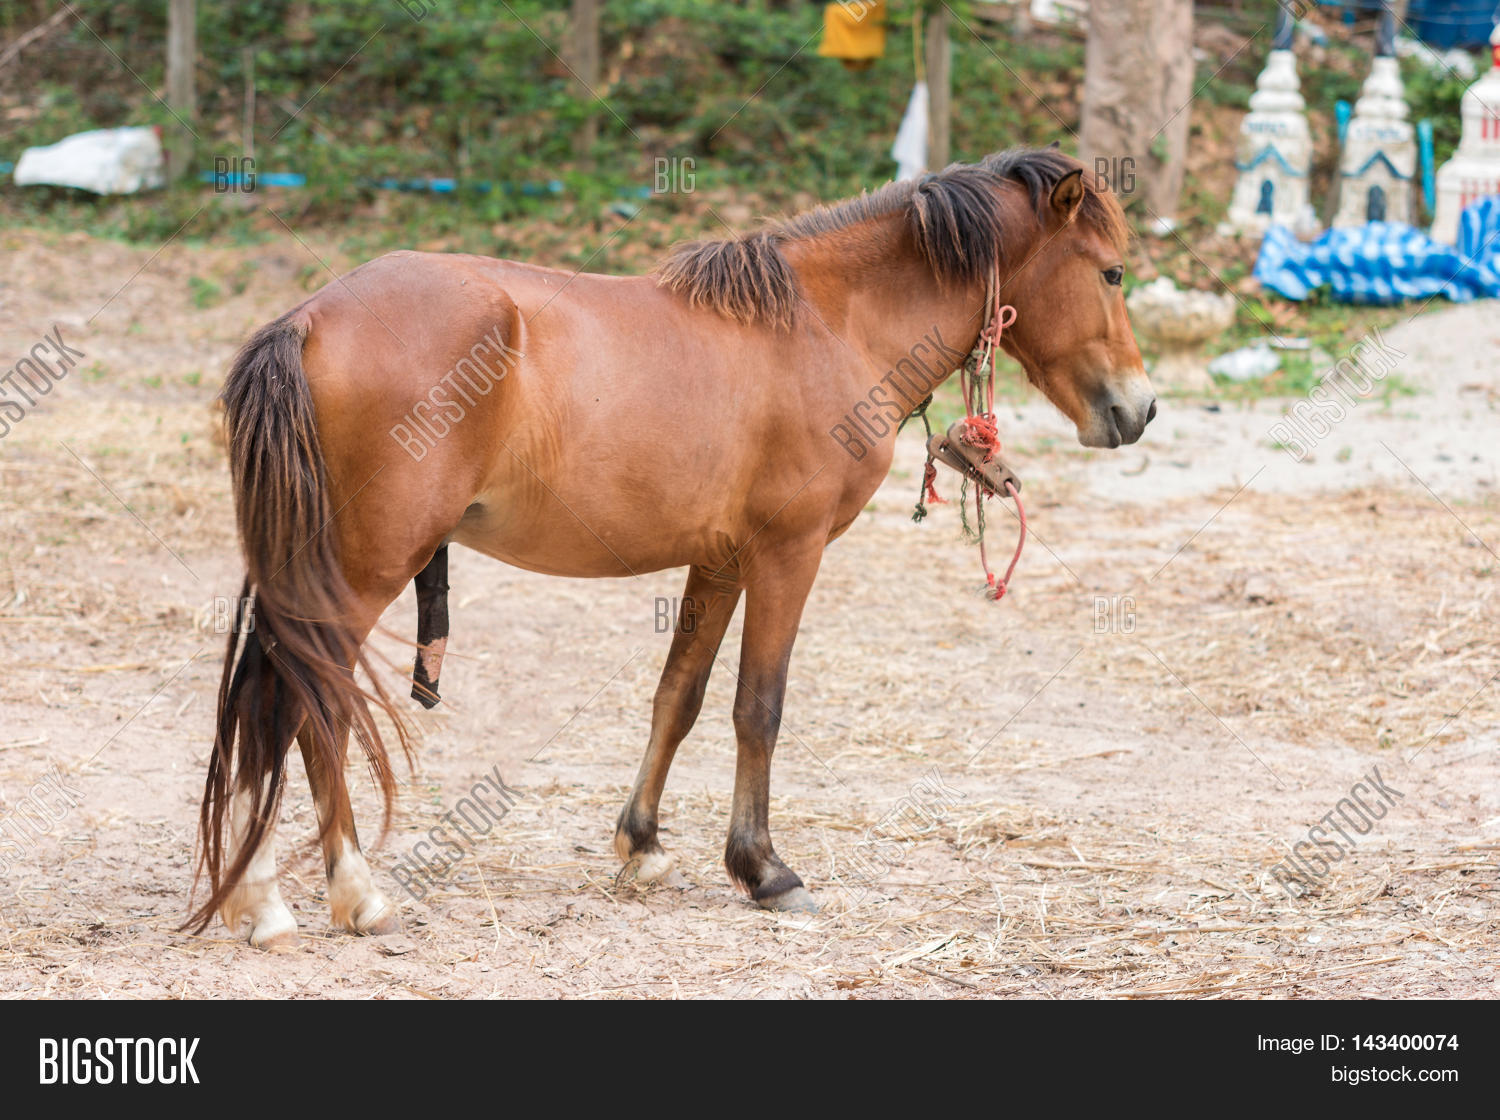 Penis Horse Image And Photo Free Trial Bigstock